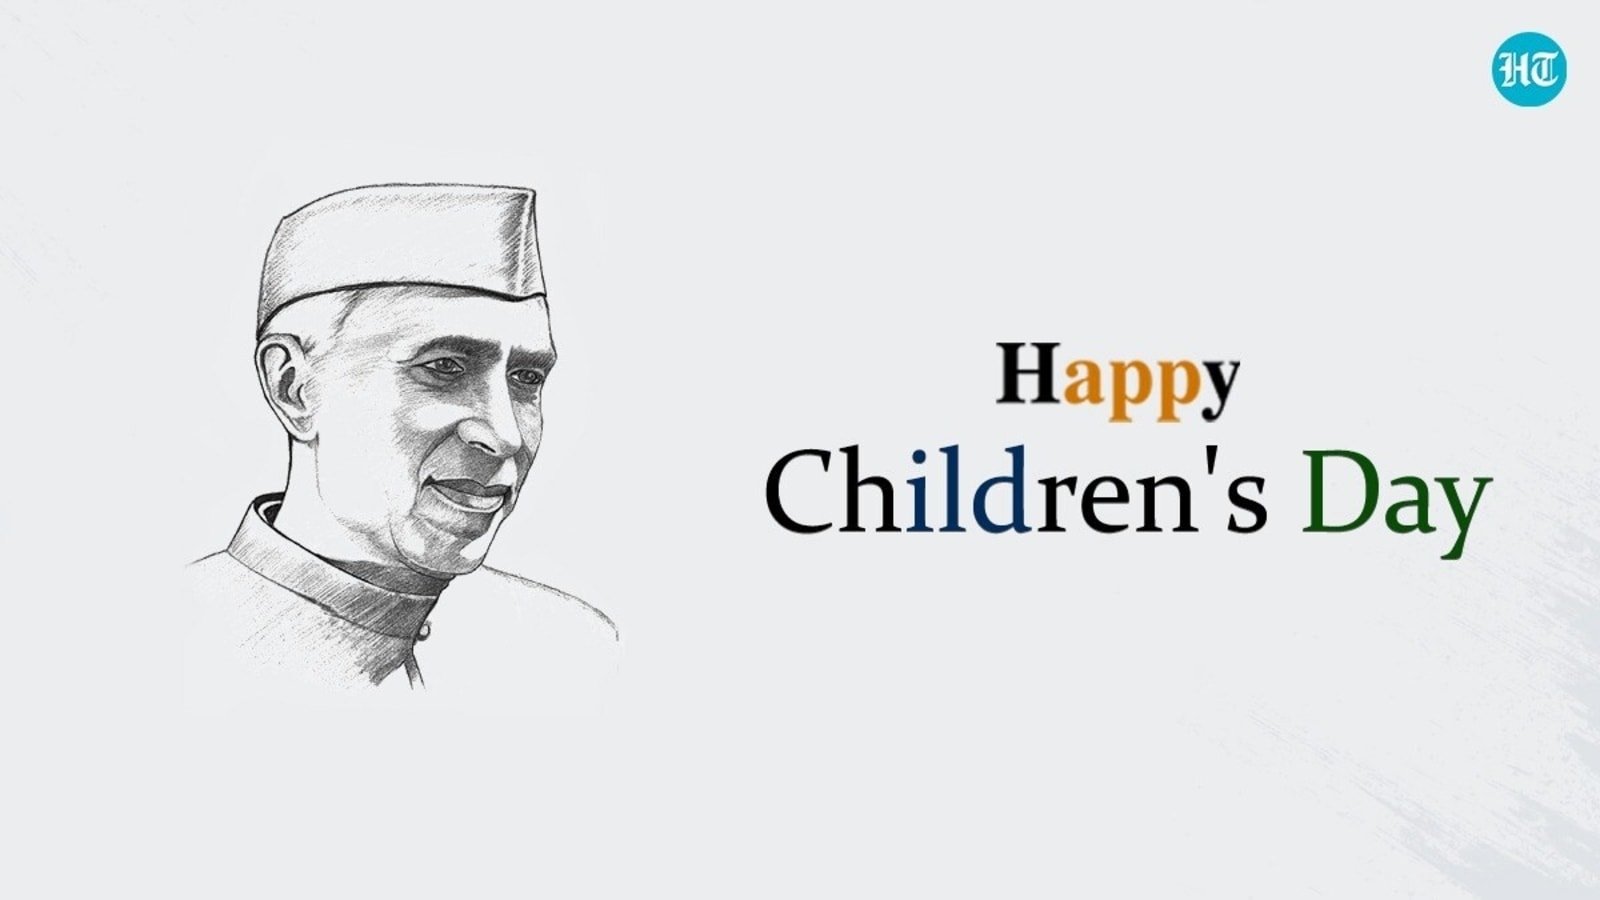 Happy Childrens Day 2021 Quotes by Jawaharlal Nehru wishes images  messages to share on Bal Diwas  Hindustan Times